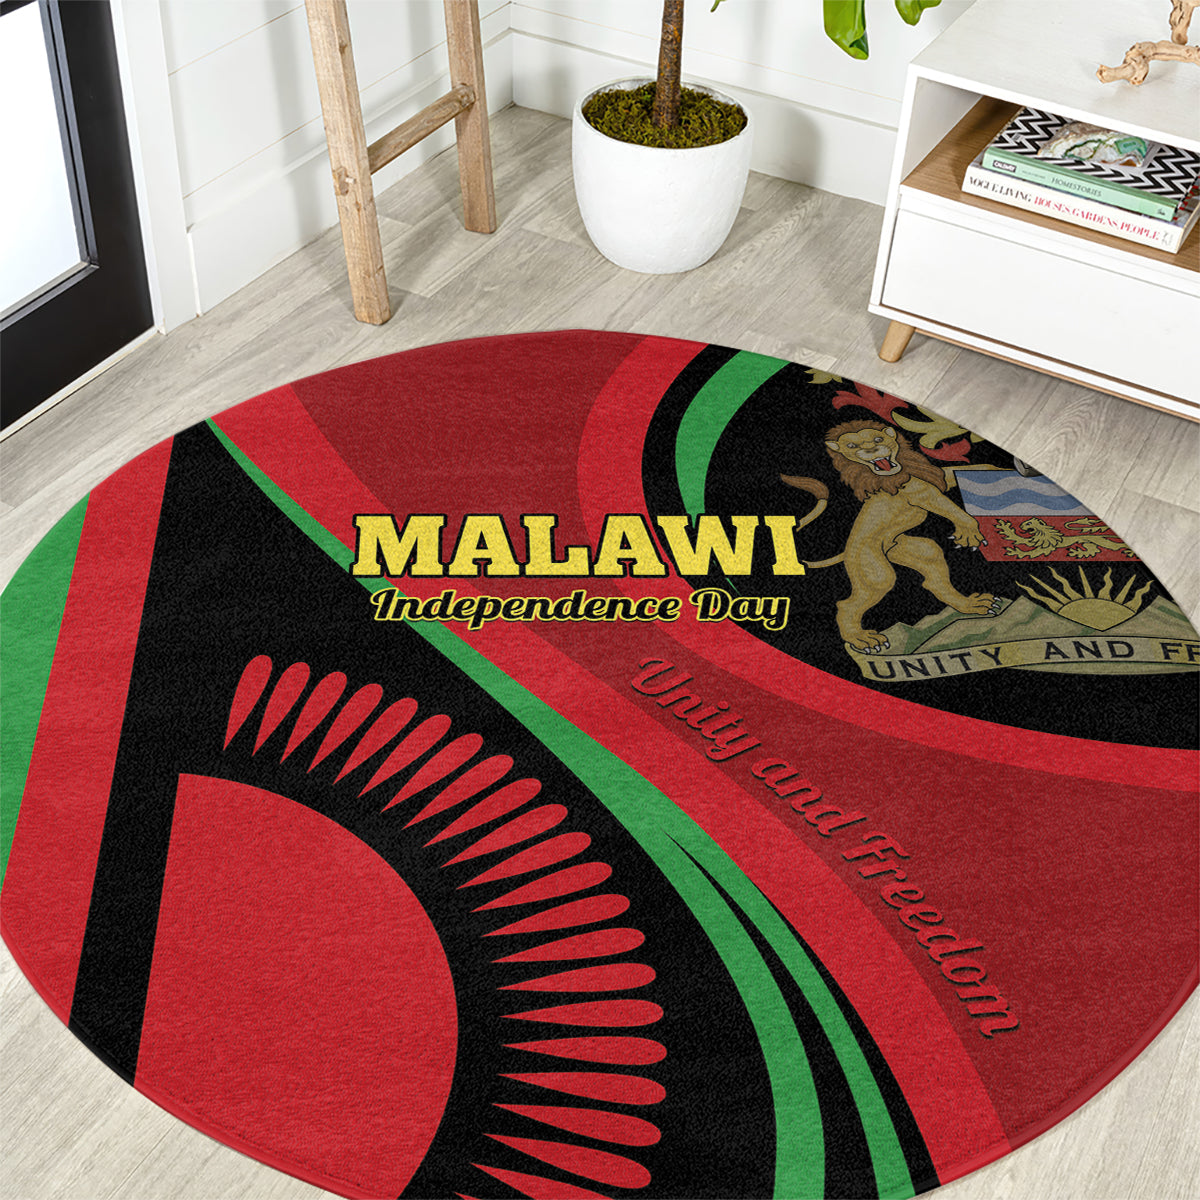 Malawi Independence Day Round Carpet Unity and Freedom